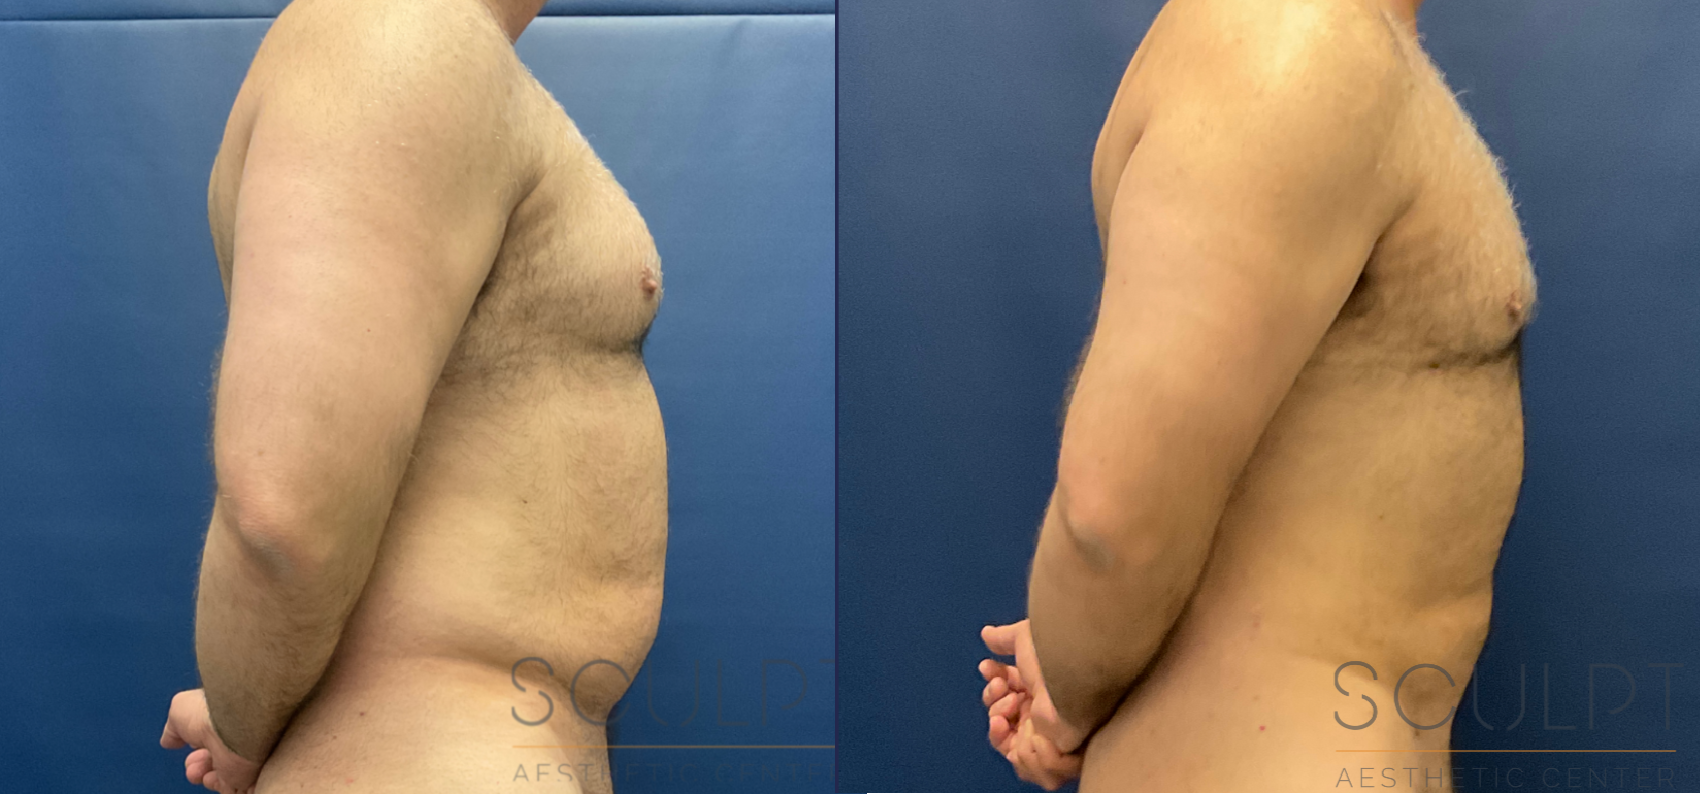 Male Liposuction Before & After Sculpcenter